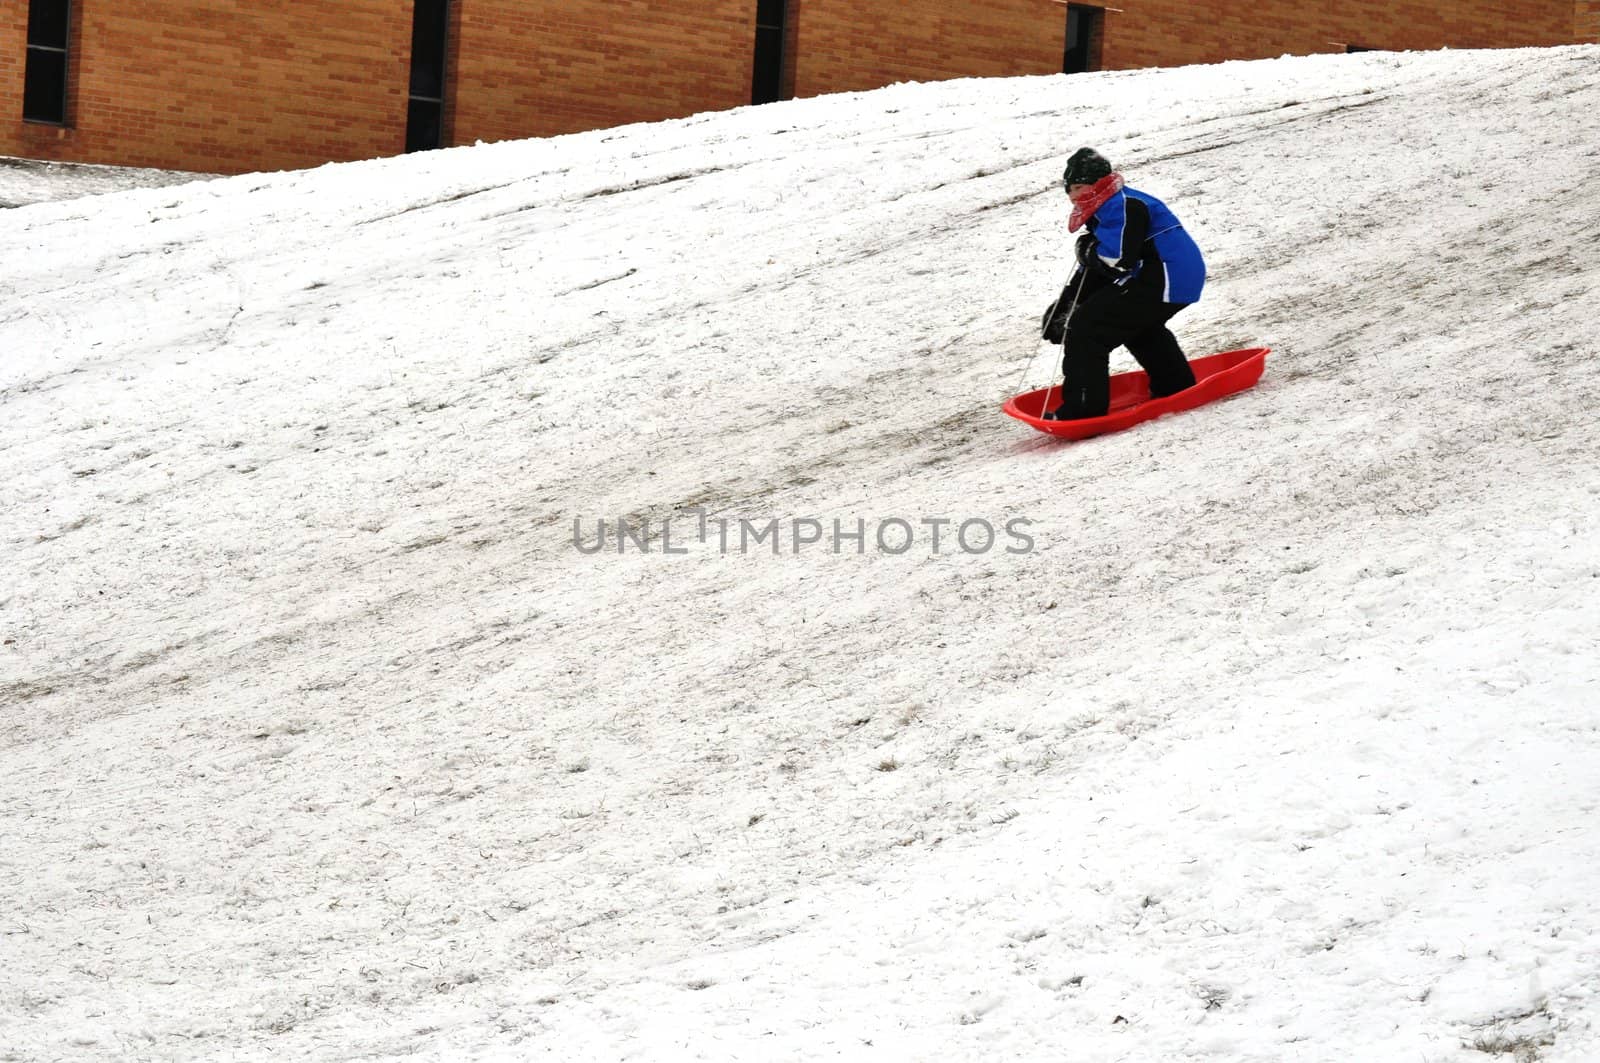 sledding at the top of the hill by RefocusPhoto